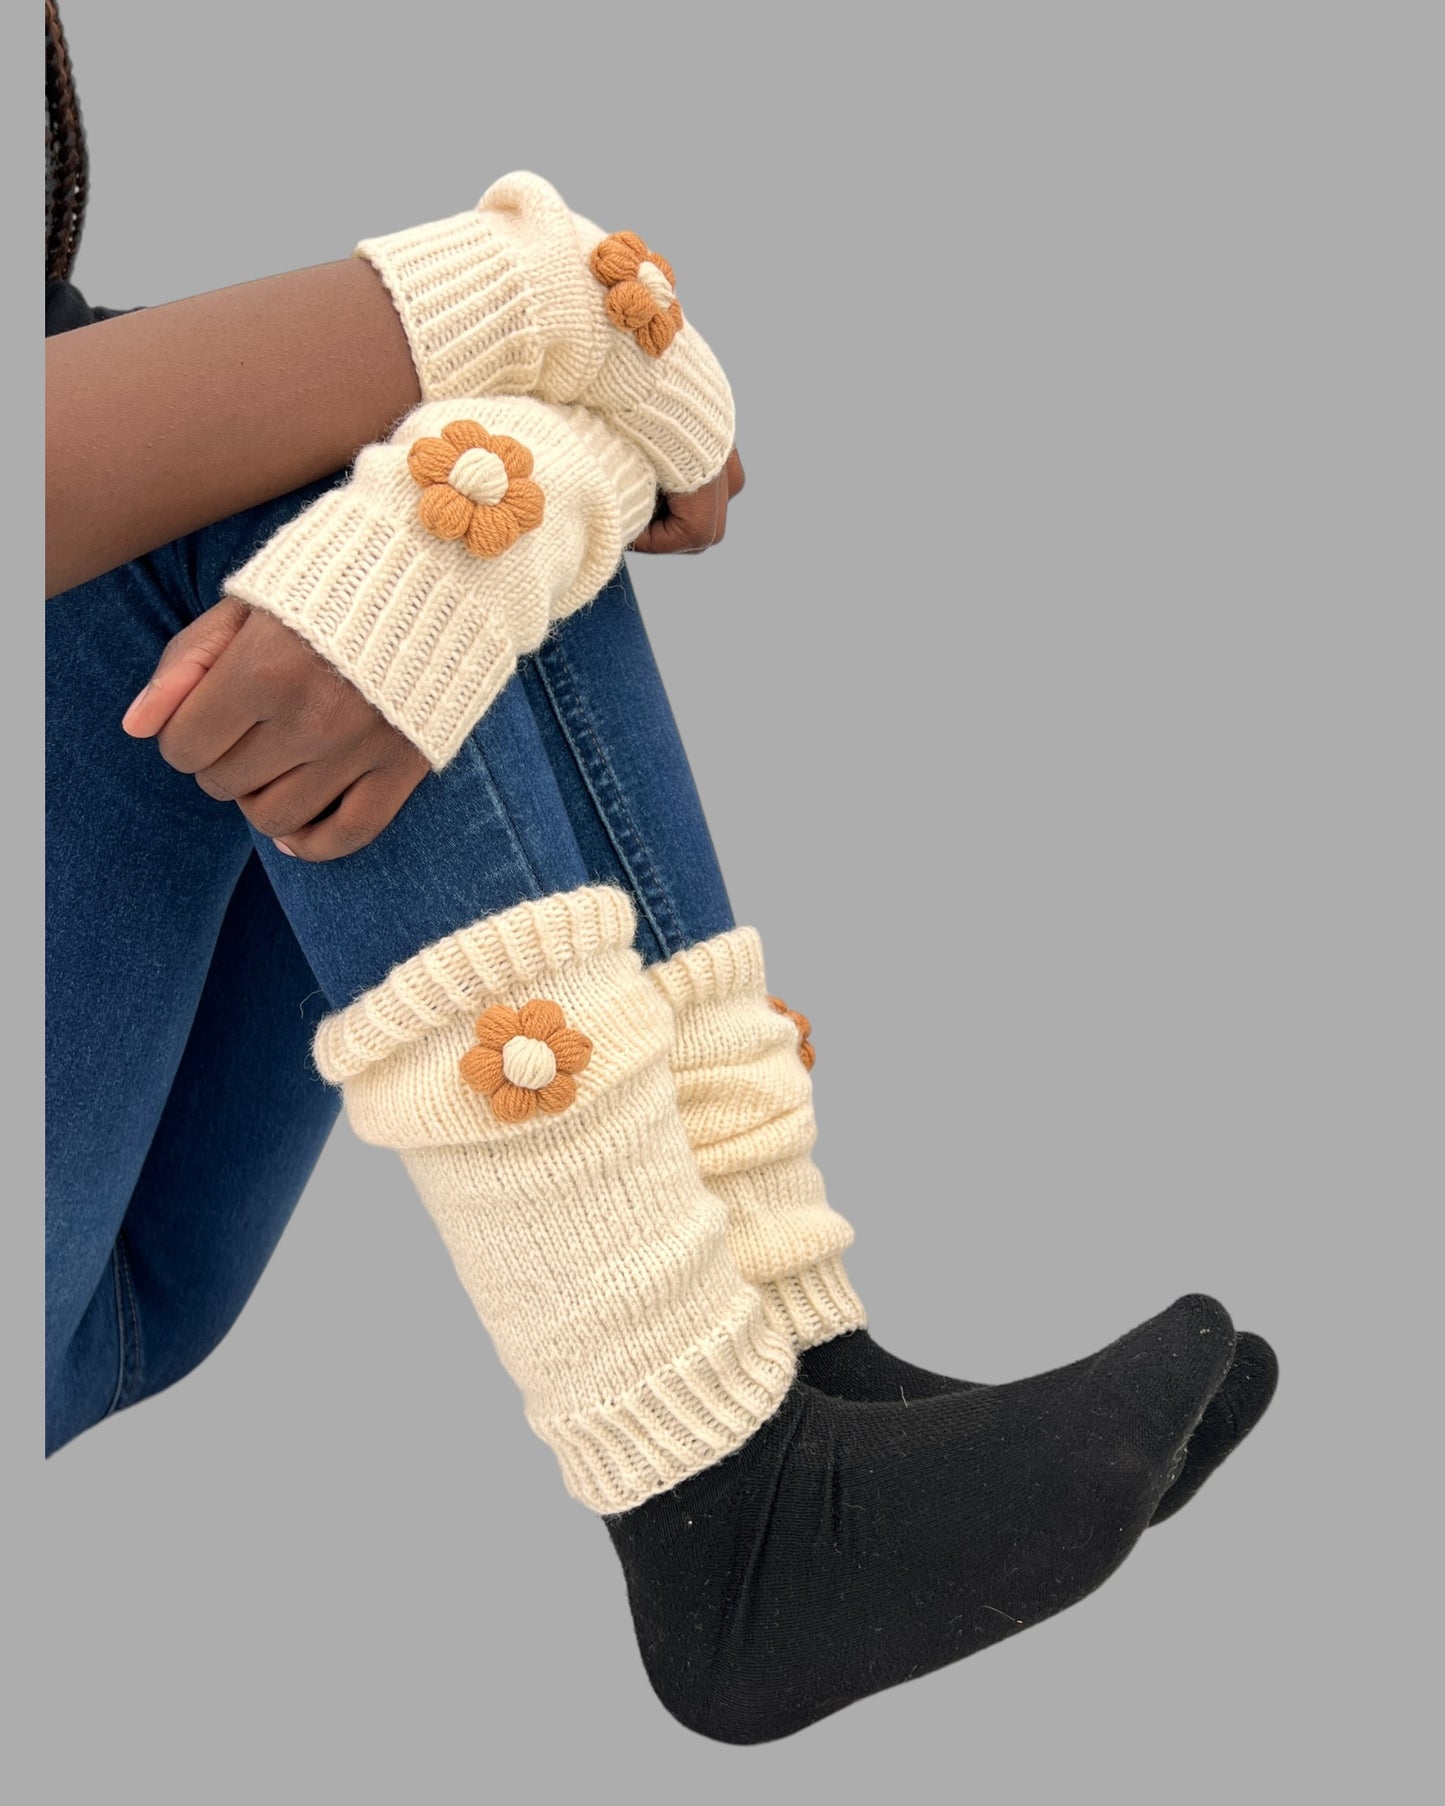 Cute Crochet Daisy Flower Leg Warmers - Birthday Gift for Girls: Granddaughter, Daughter, Niece. Perfect for Stocking Stuffers, Baby Showers